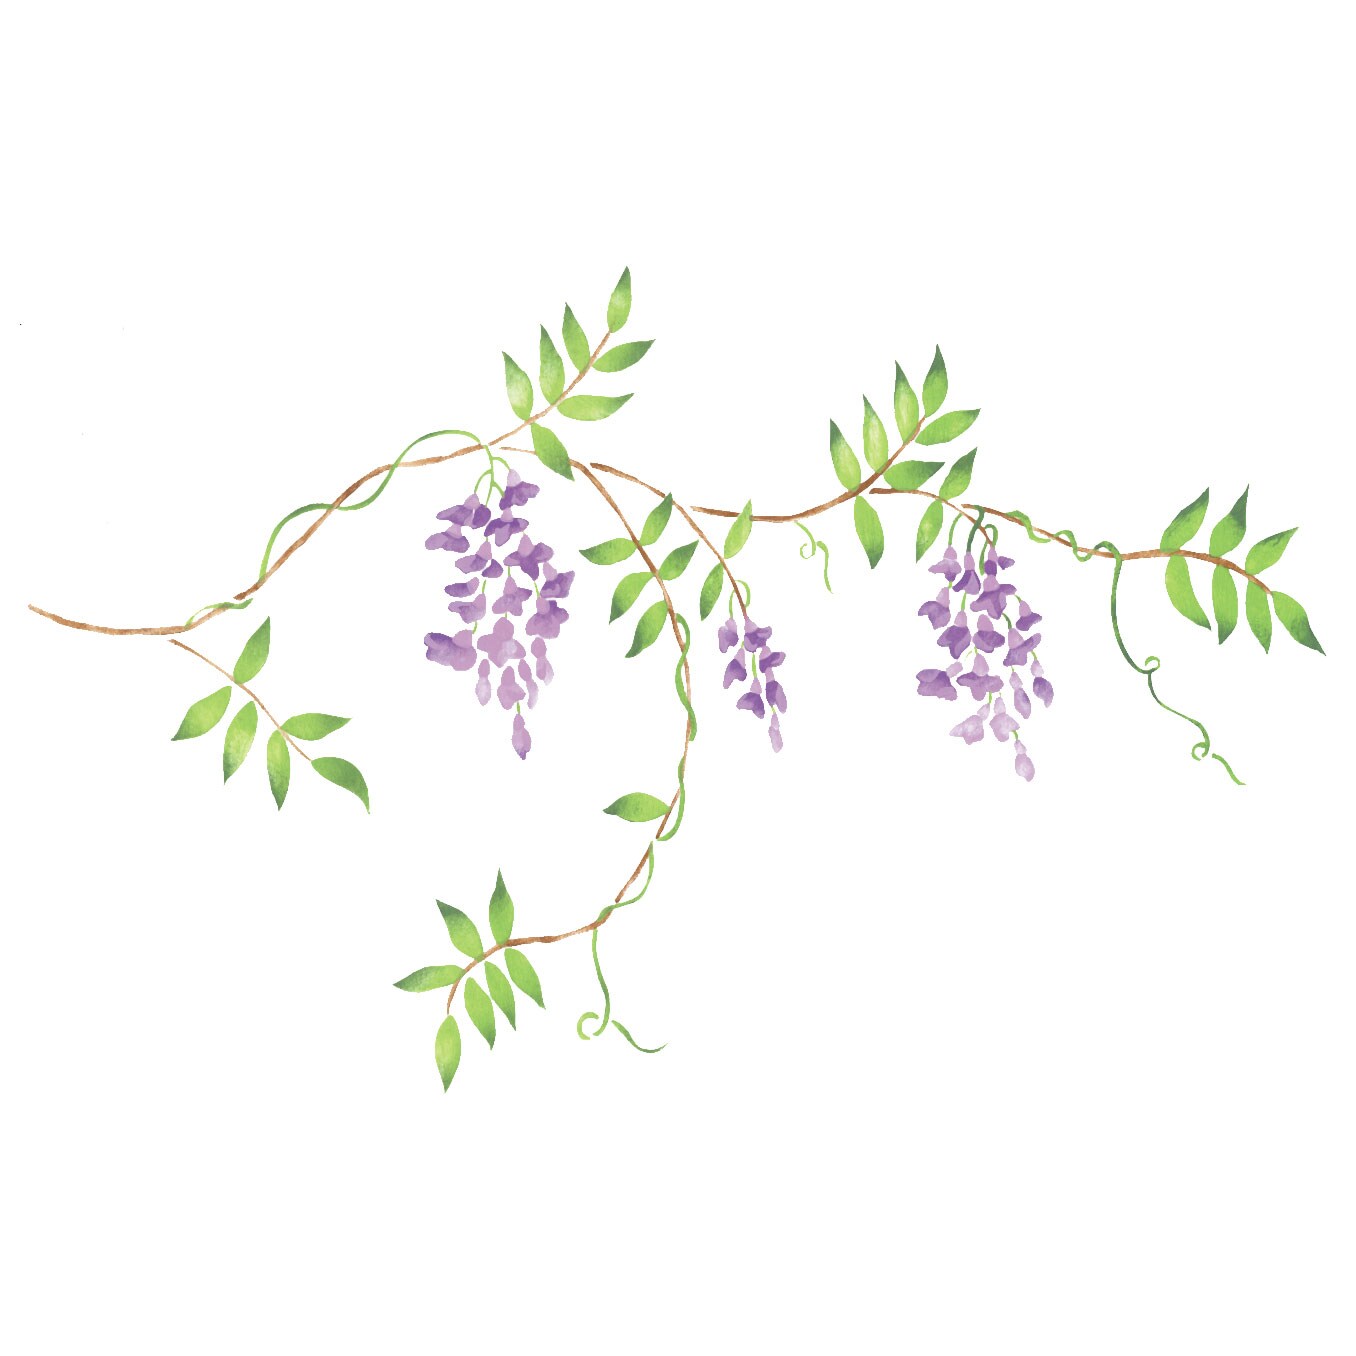 Large Wisteria Vine Wall Stencil | 2962 by Designer Stencils | Floral Stencils | Reusable Art Craft Stencils for Painting on Walls, Canvas, Wood | Reusable Plastic Paint Stencil for Home Makeover | Easy to Use &#x26; Clean Art Stencil